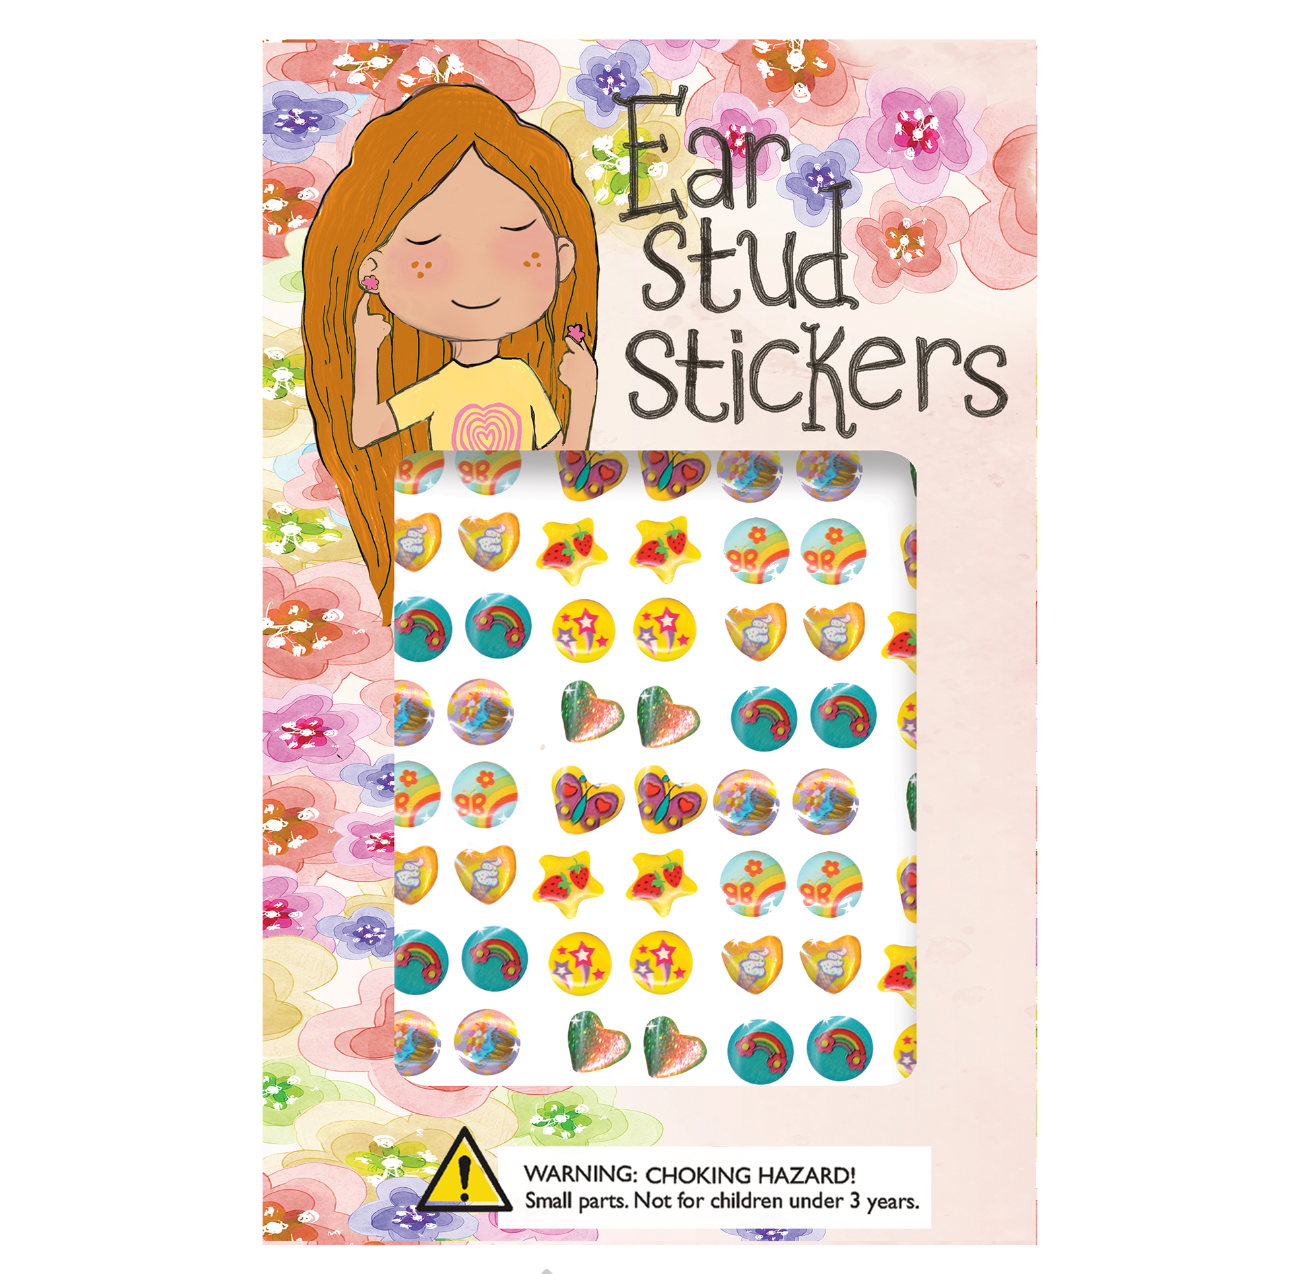 Ear Stud Stickers - Magpies Paducah